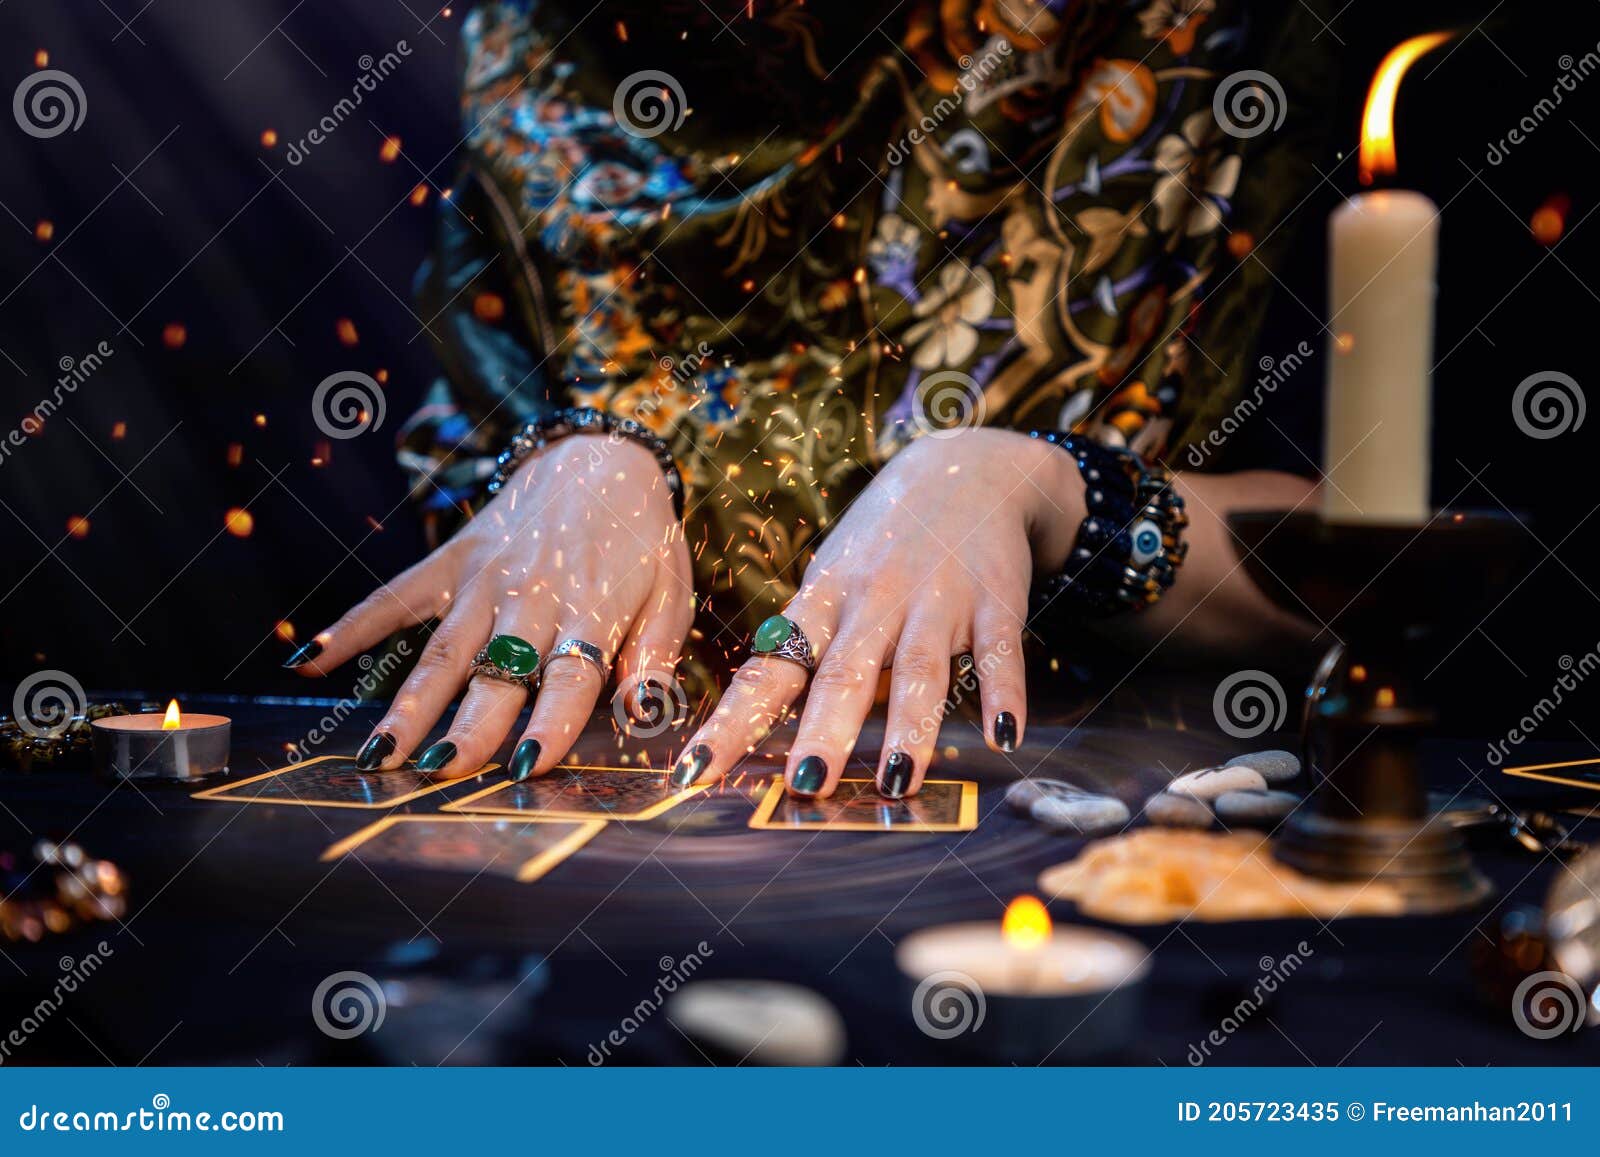 cartomancy. a fortune teller reads tarot cards. on the table are candles and fortune-telling objects and sparks. hands close up.